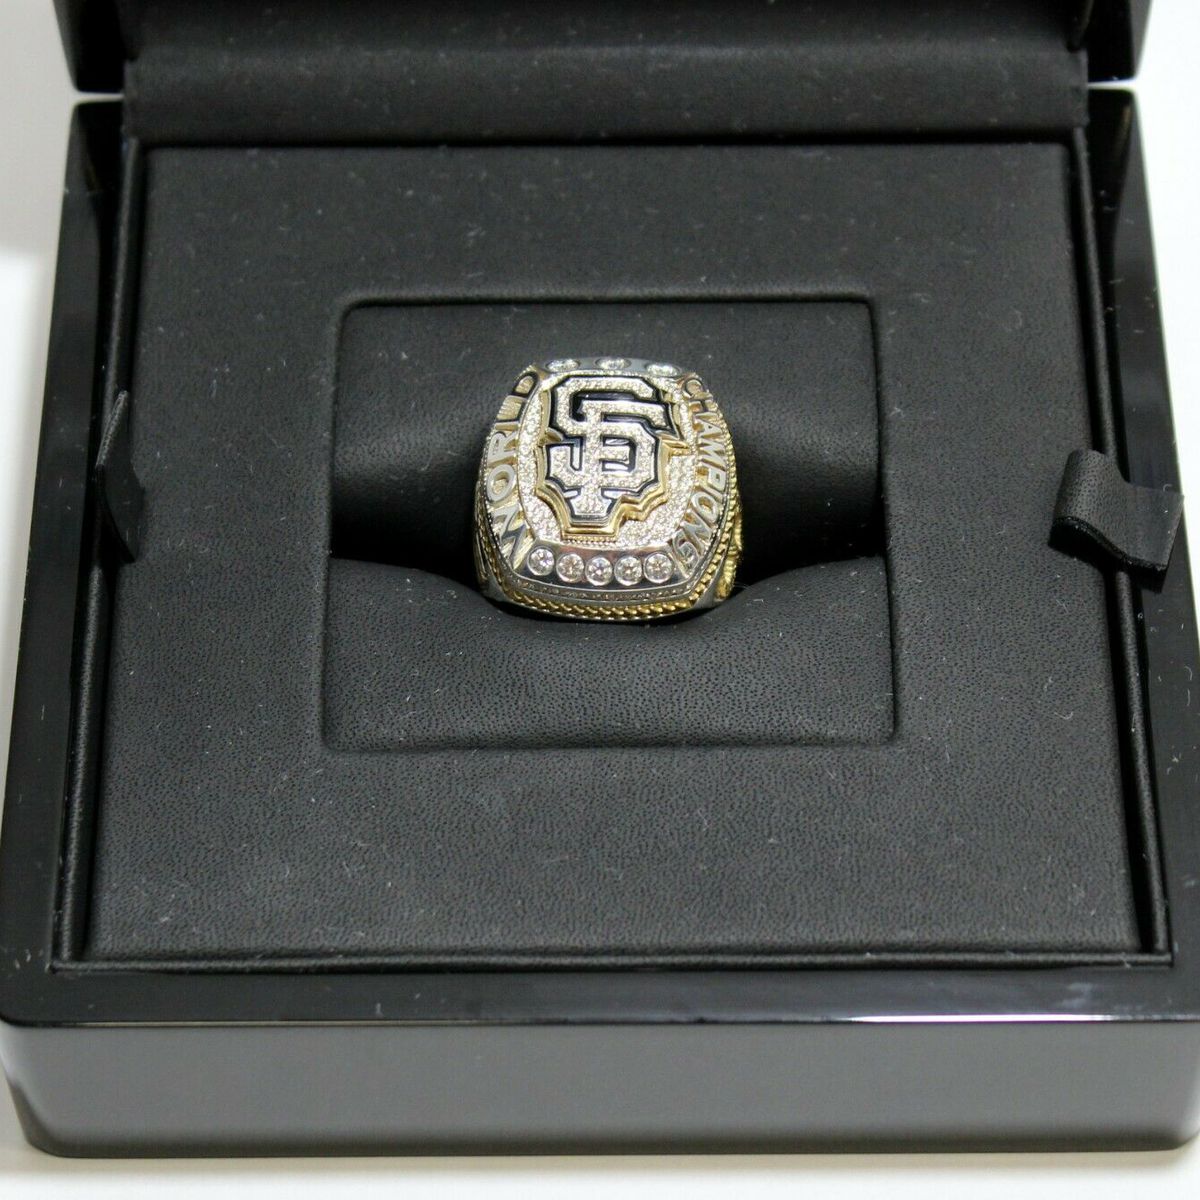 A 2014 World Series ring for sale on eBay